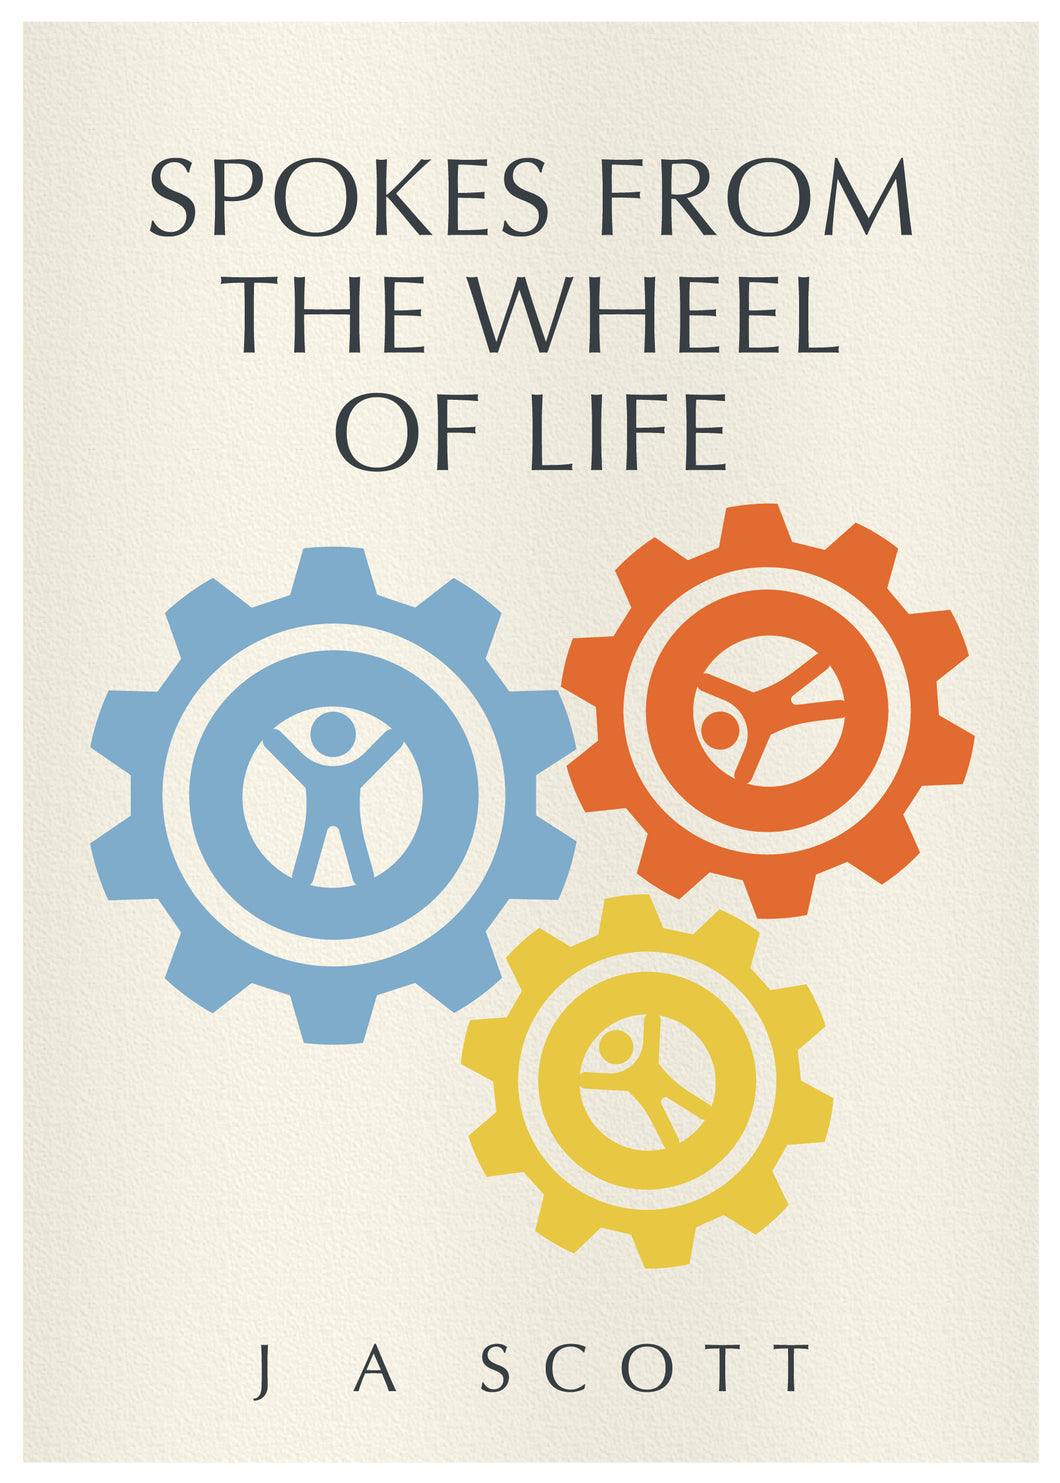 Spokes From The Wheel Of Life - J A Scott